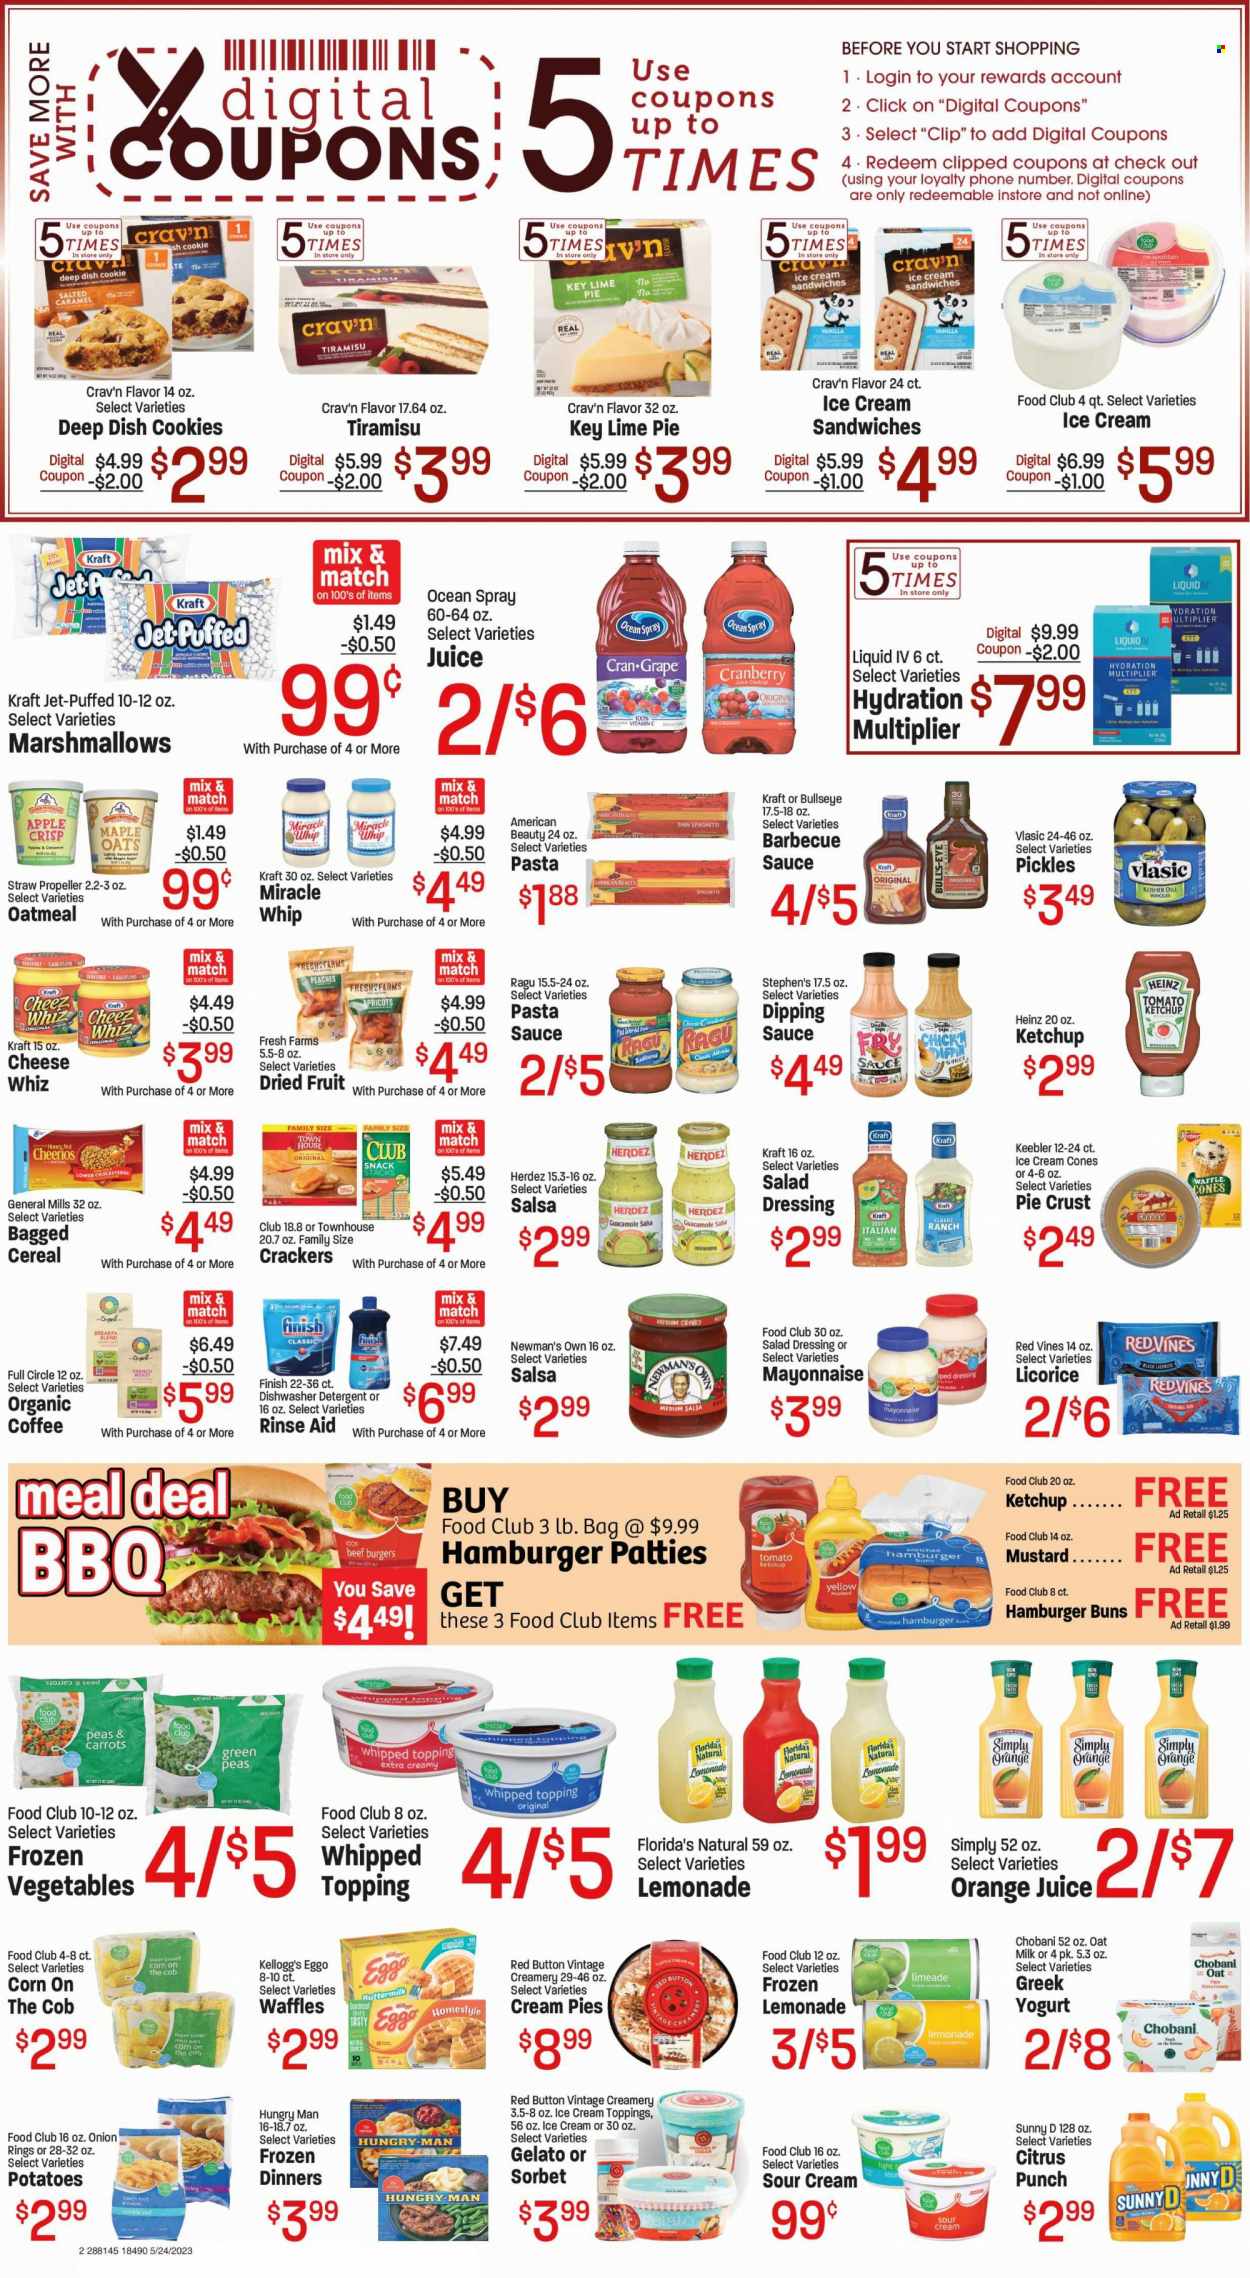 thumbnail - Red Apple Marketplace Flyer - 05/24/2023 - 05/30/2023 - Sales products - buns, burger buns, cream pie, waffles, tiramisu, carrots, corn, sweet corn, apricots, peaches, spaghetti, pasta sauce, onion rings, sauce, beef burger, Kraft®, guacamole, greek yoghurt, Chobani, oat milk, sour cream, mayonnaise, Miracle Whip, ice cream, ice cream sandwich, gelato, sorbet, crinkle fries, marshmallows, snack, crackers, Kellogg's, Florida's Natural, Keebler, Red Vines, waffle cones, pie crust, oatmeal, topping, Heinz, pickles, cereals, Cheerios, dill, BBQ sauce, mustard, salad dressing, ketchup, dressing, salsa, ragu, dried fruit, cranberry juice, orange juice, juice, Cran-Grape, fruit punch, coffee, detergent, Jet. Page 2.